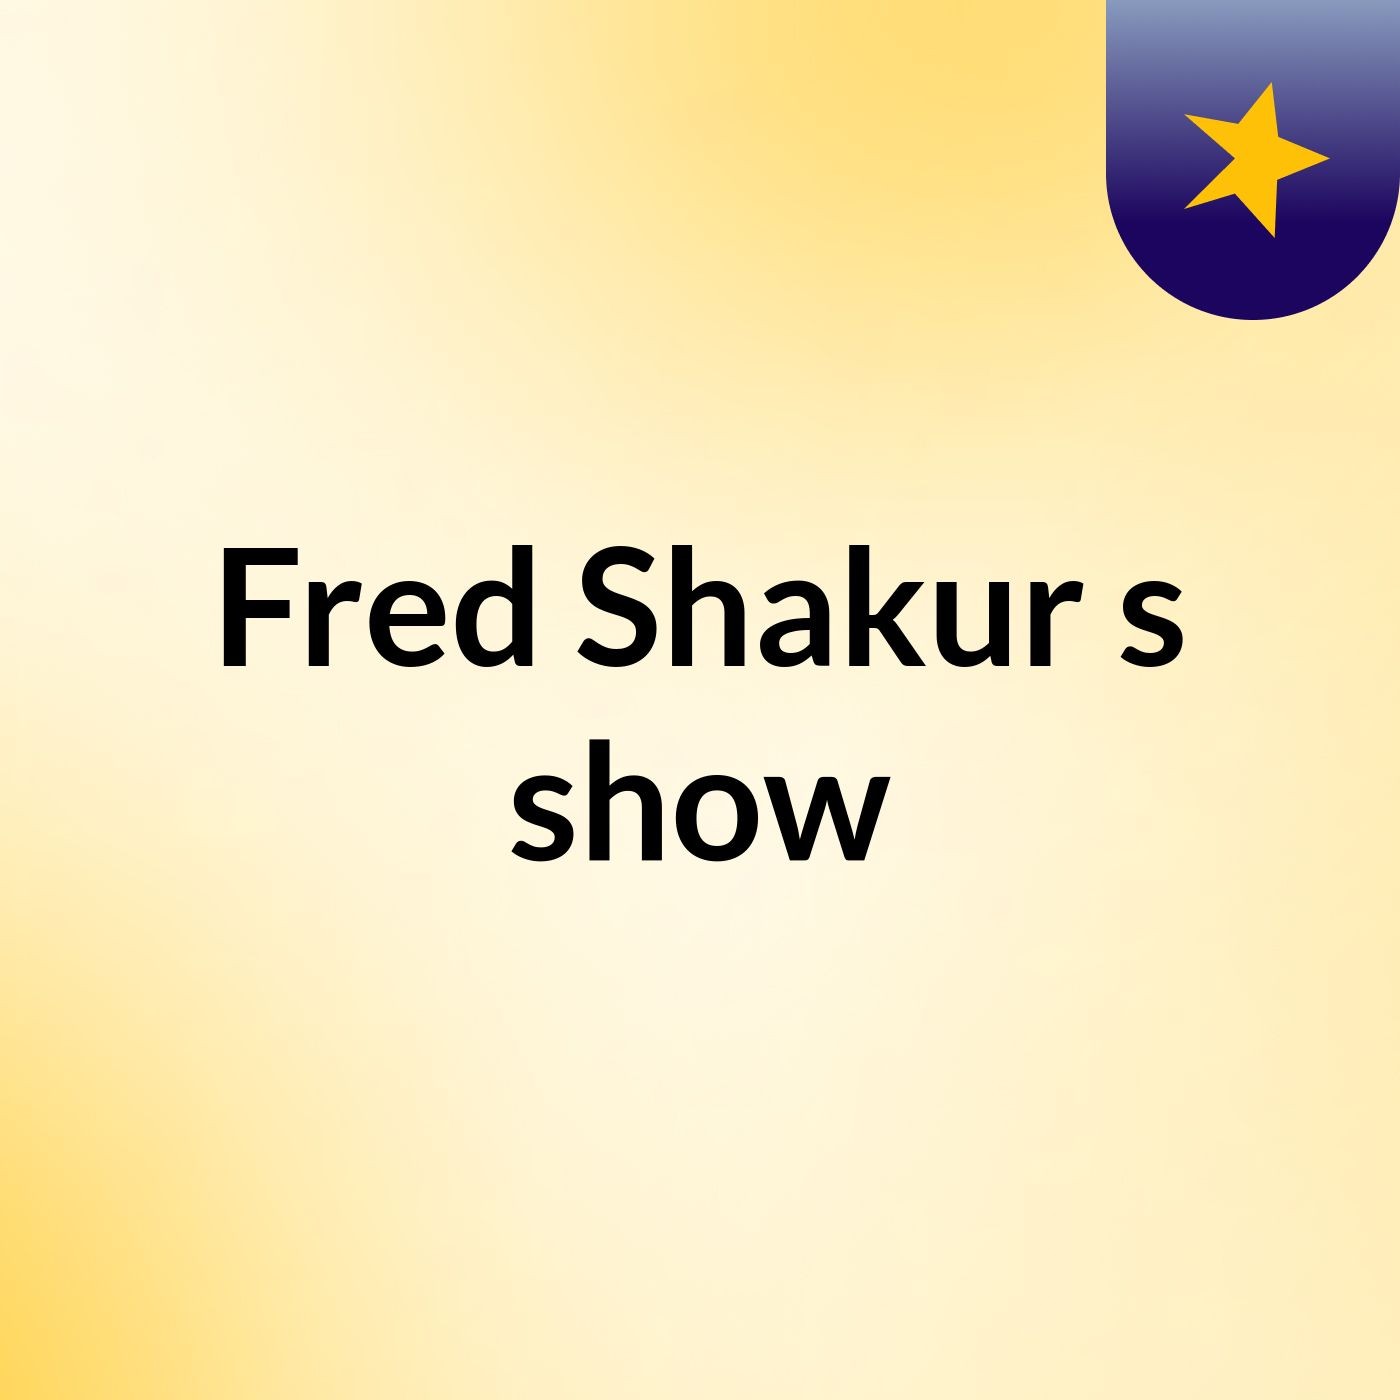 Fred Shakur's show